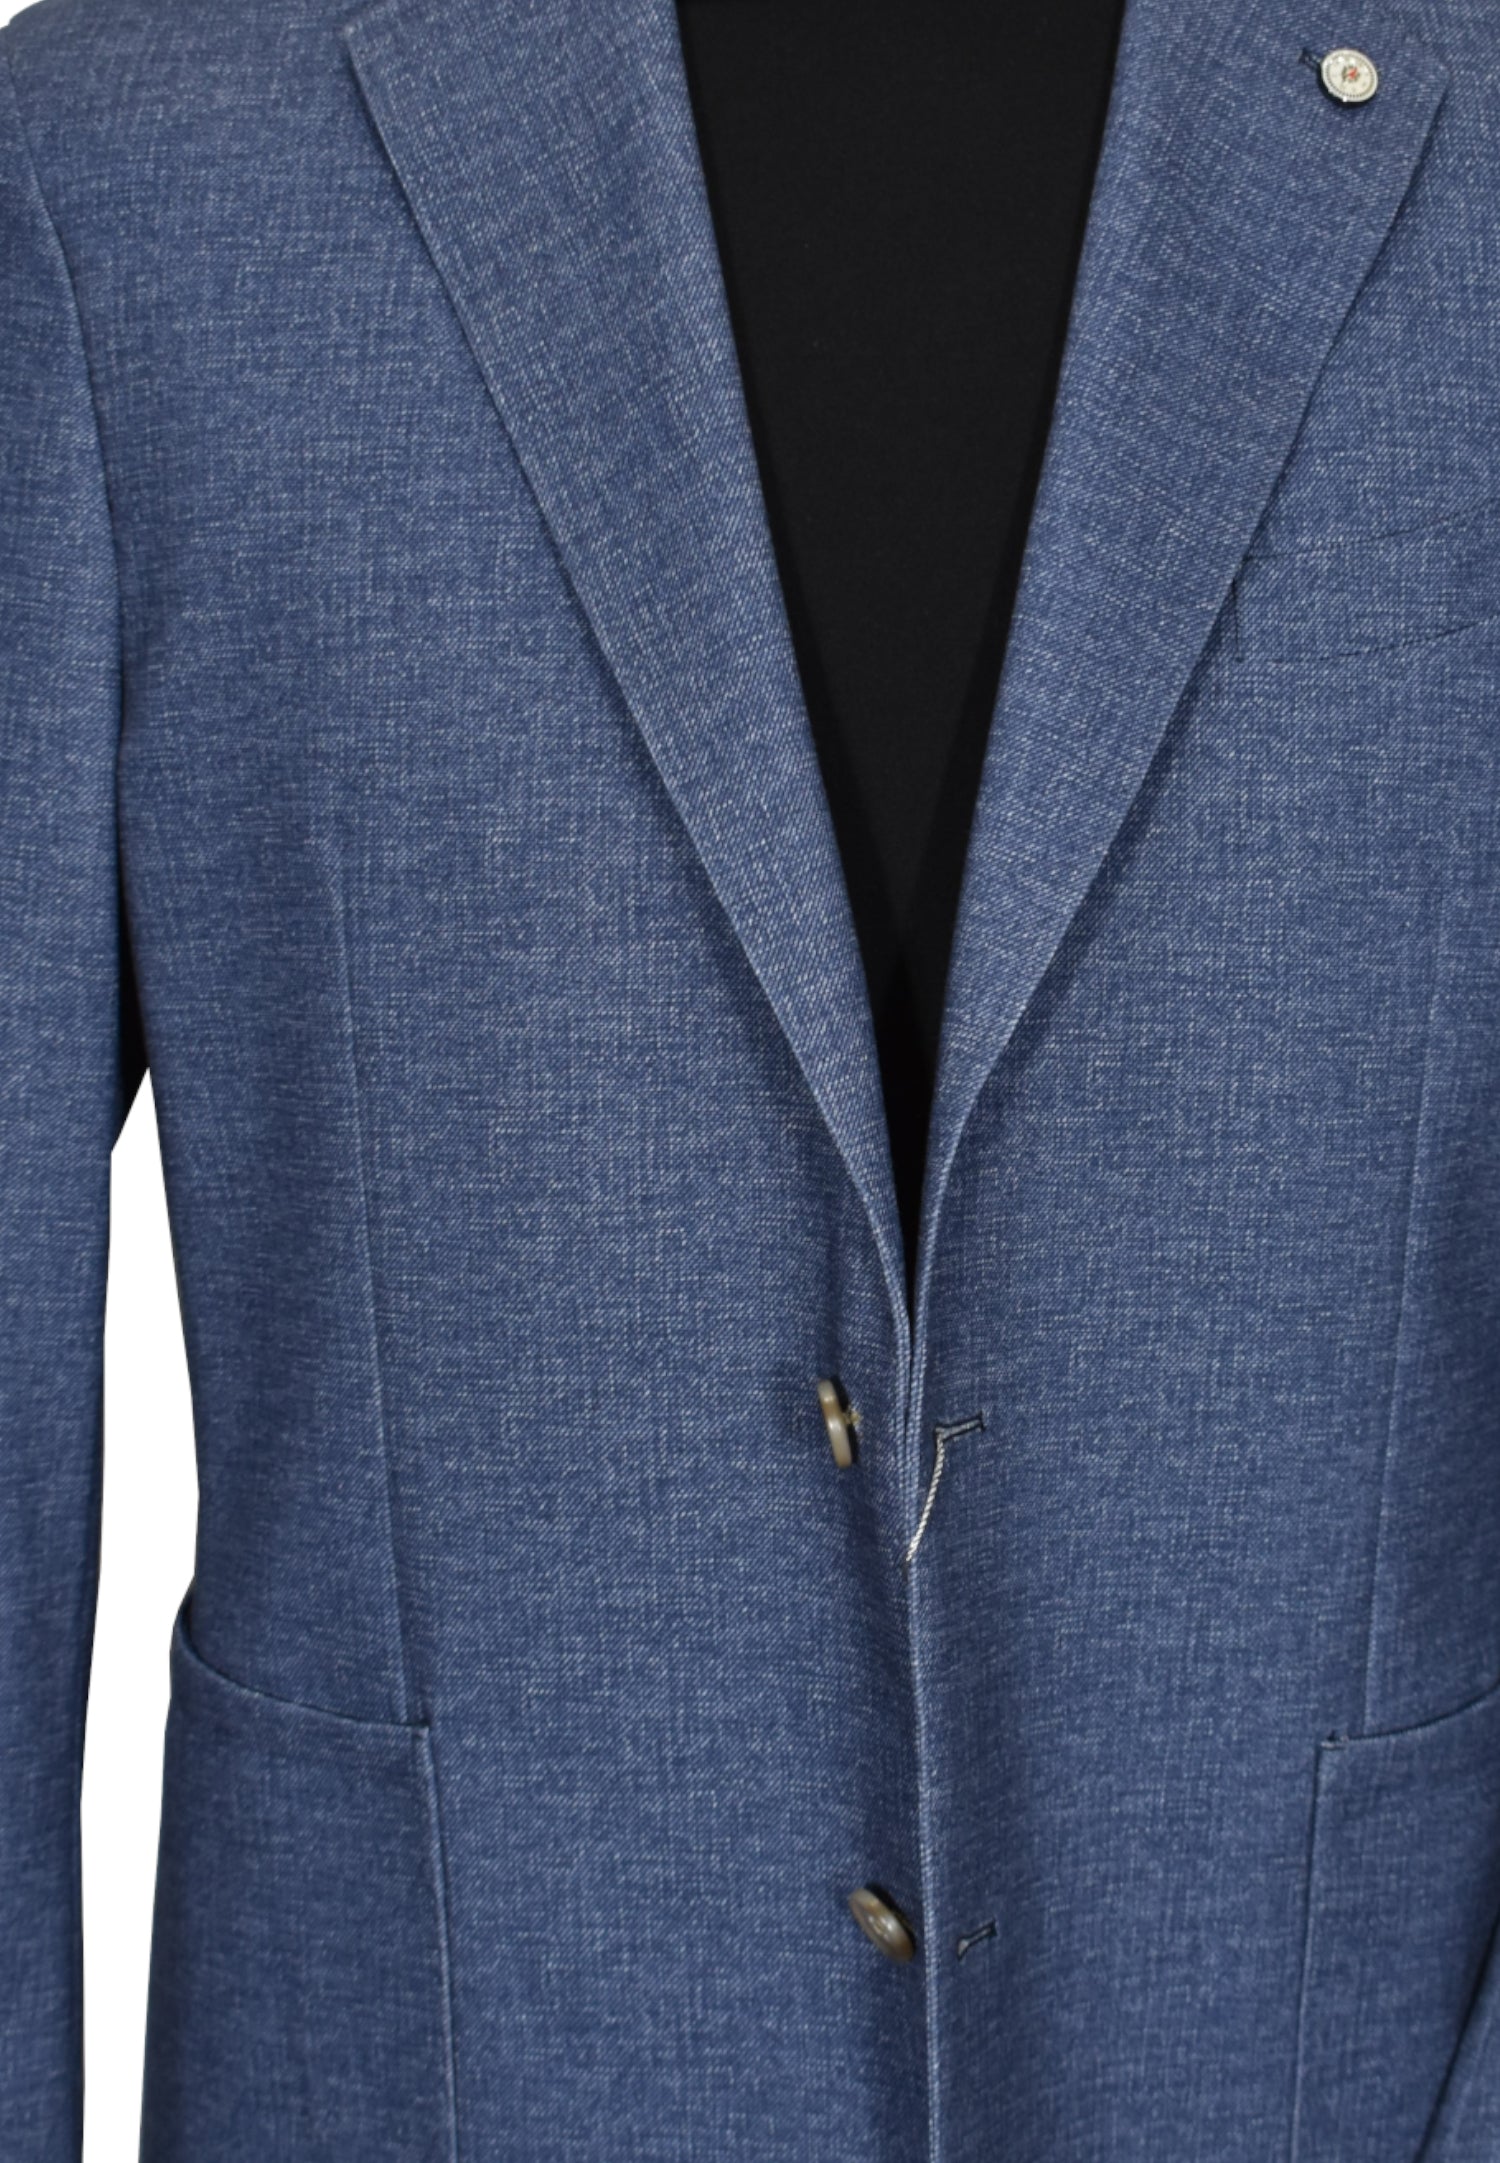 Style this fashion sport coat either cool and casual with jeans or dress it up with a dressy pant and sport shirt. The slim fit stretch model is 72% cotton 26% linen and 2% spandex, and side vented. Slim fit stretch, 86 microfiber 9 rayon 5 spandex, side vented.